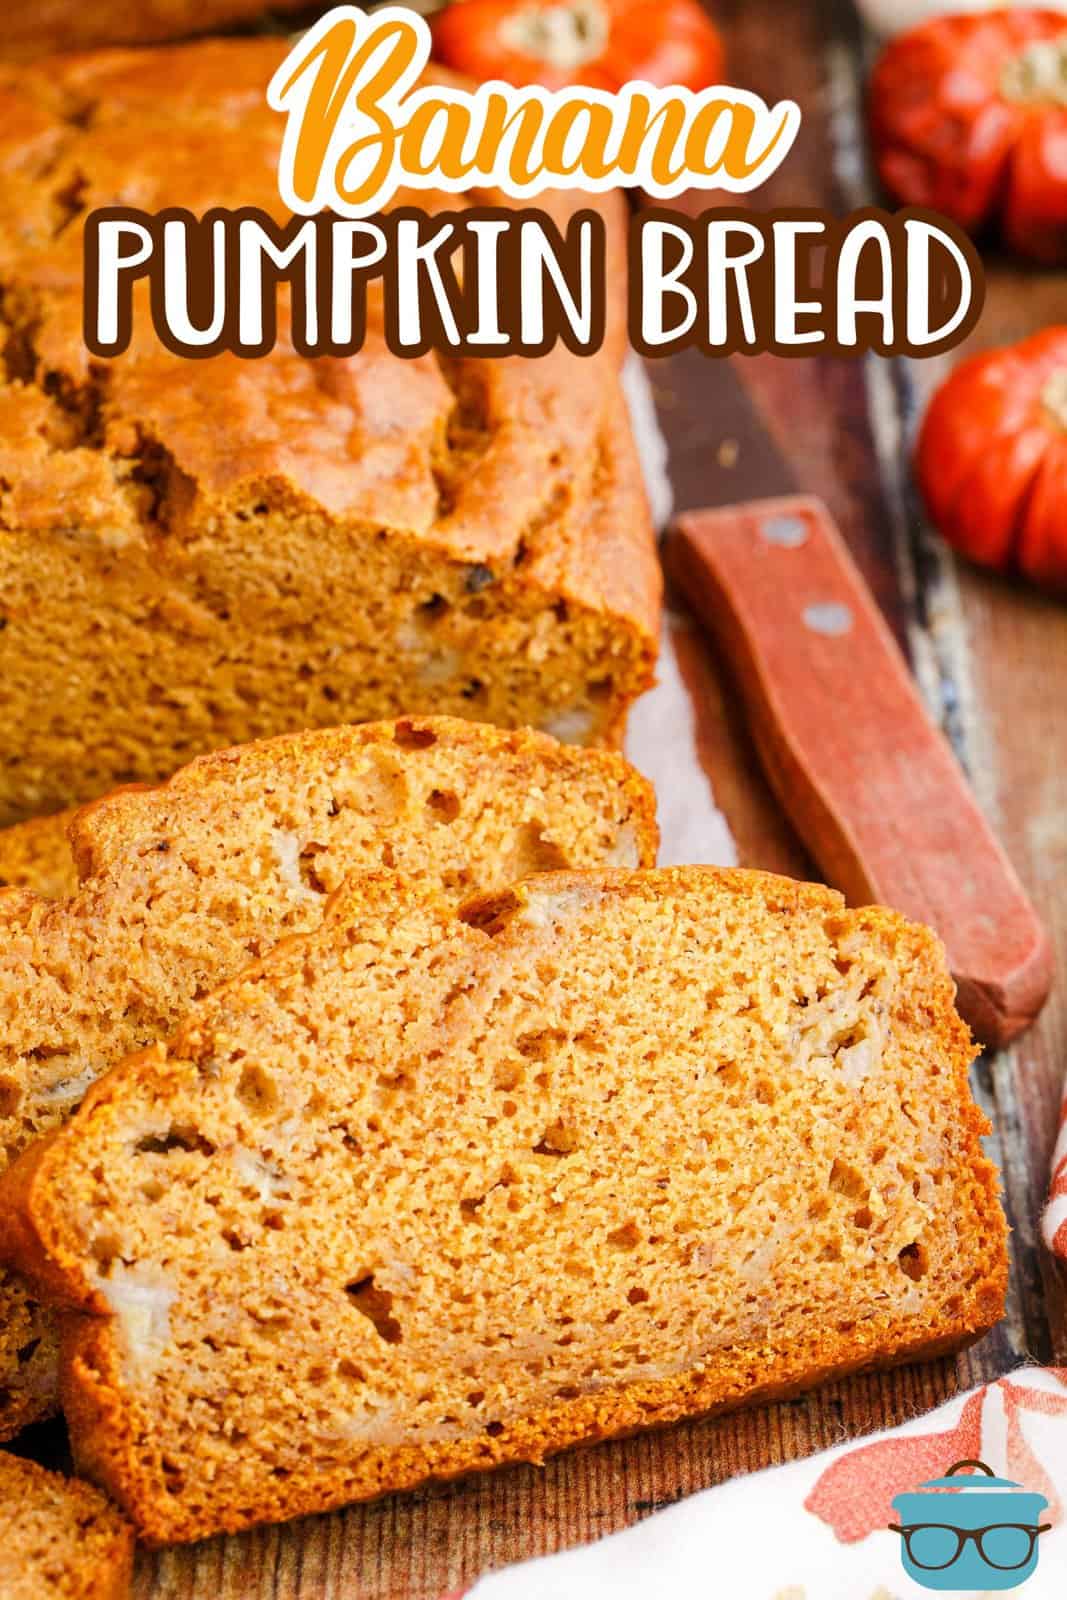 A few slices of Banana Pumpkin Bread in front of the loaf.